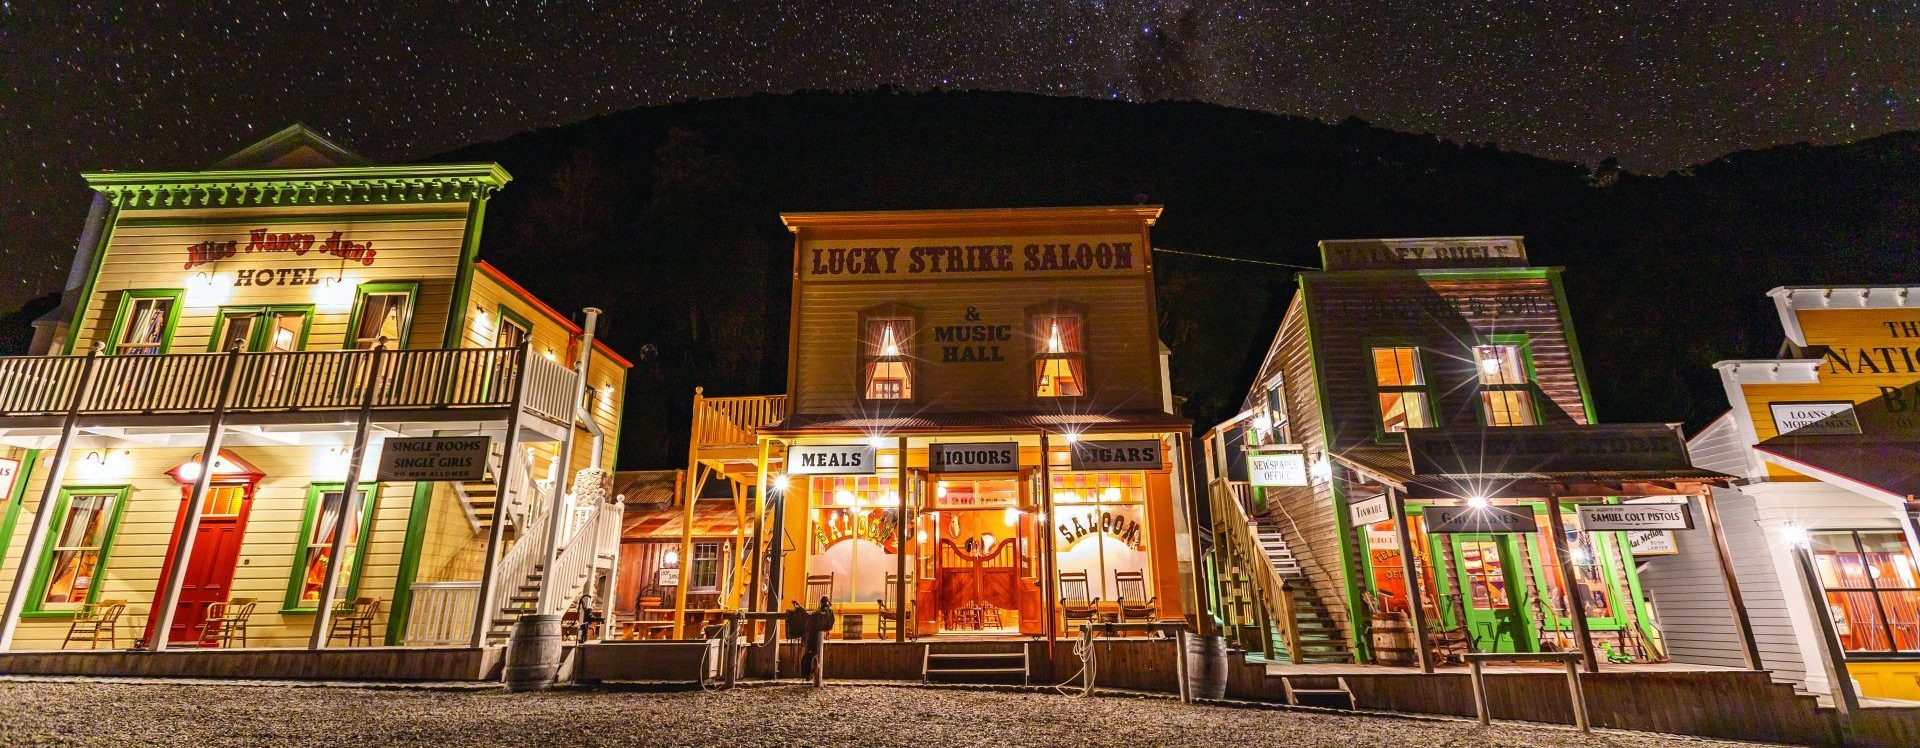 Want To Buy This Wild West Town?